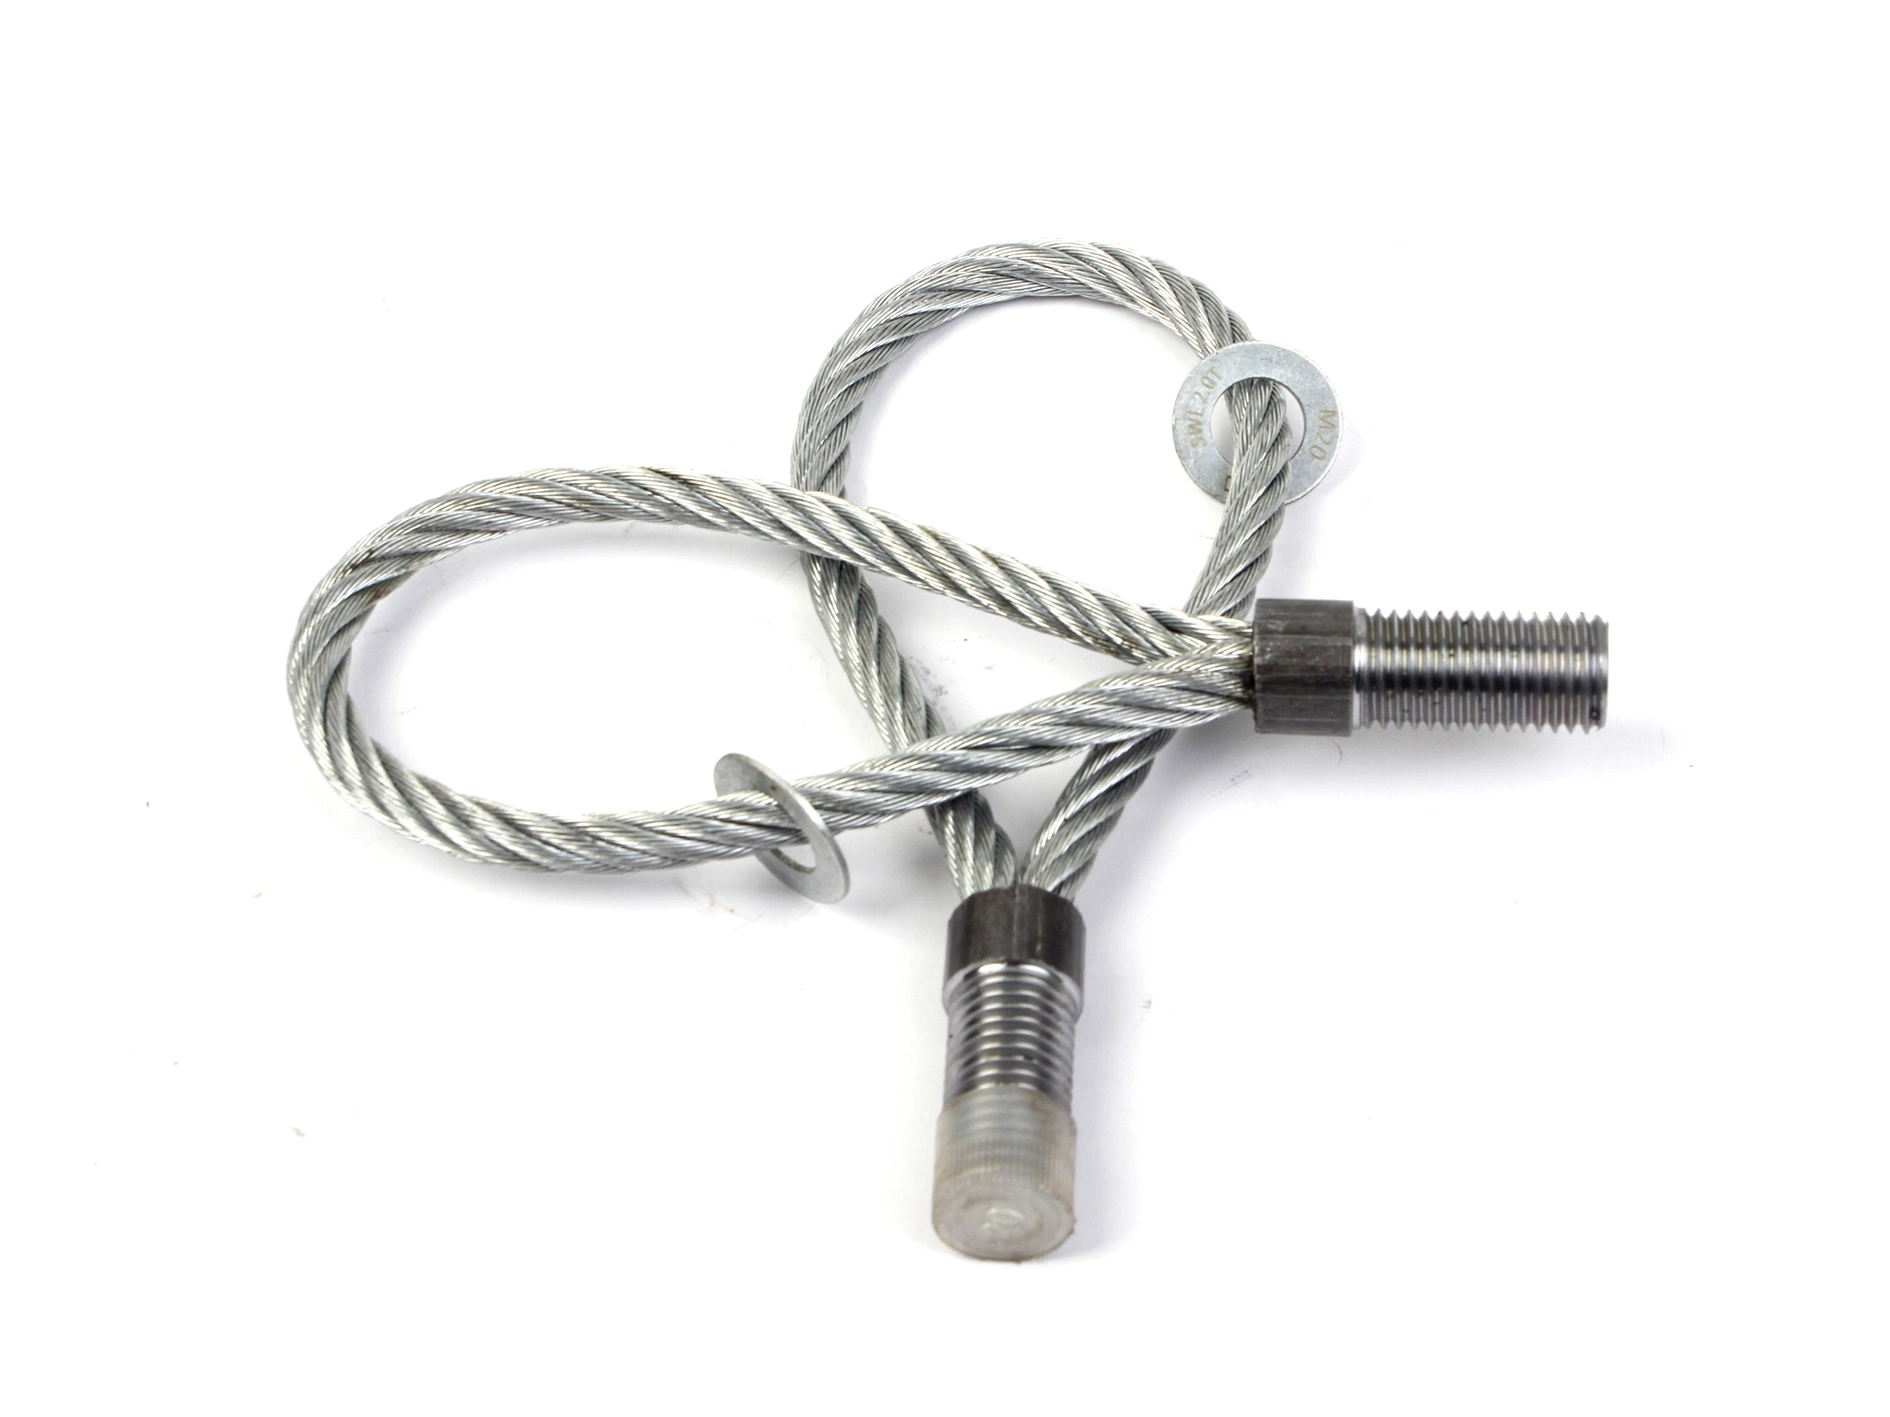 Lifting Sling Insert Braided Steel Wire Rope Sling Assembly Reinforced Threaded Sleeve